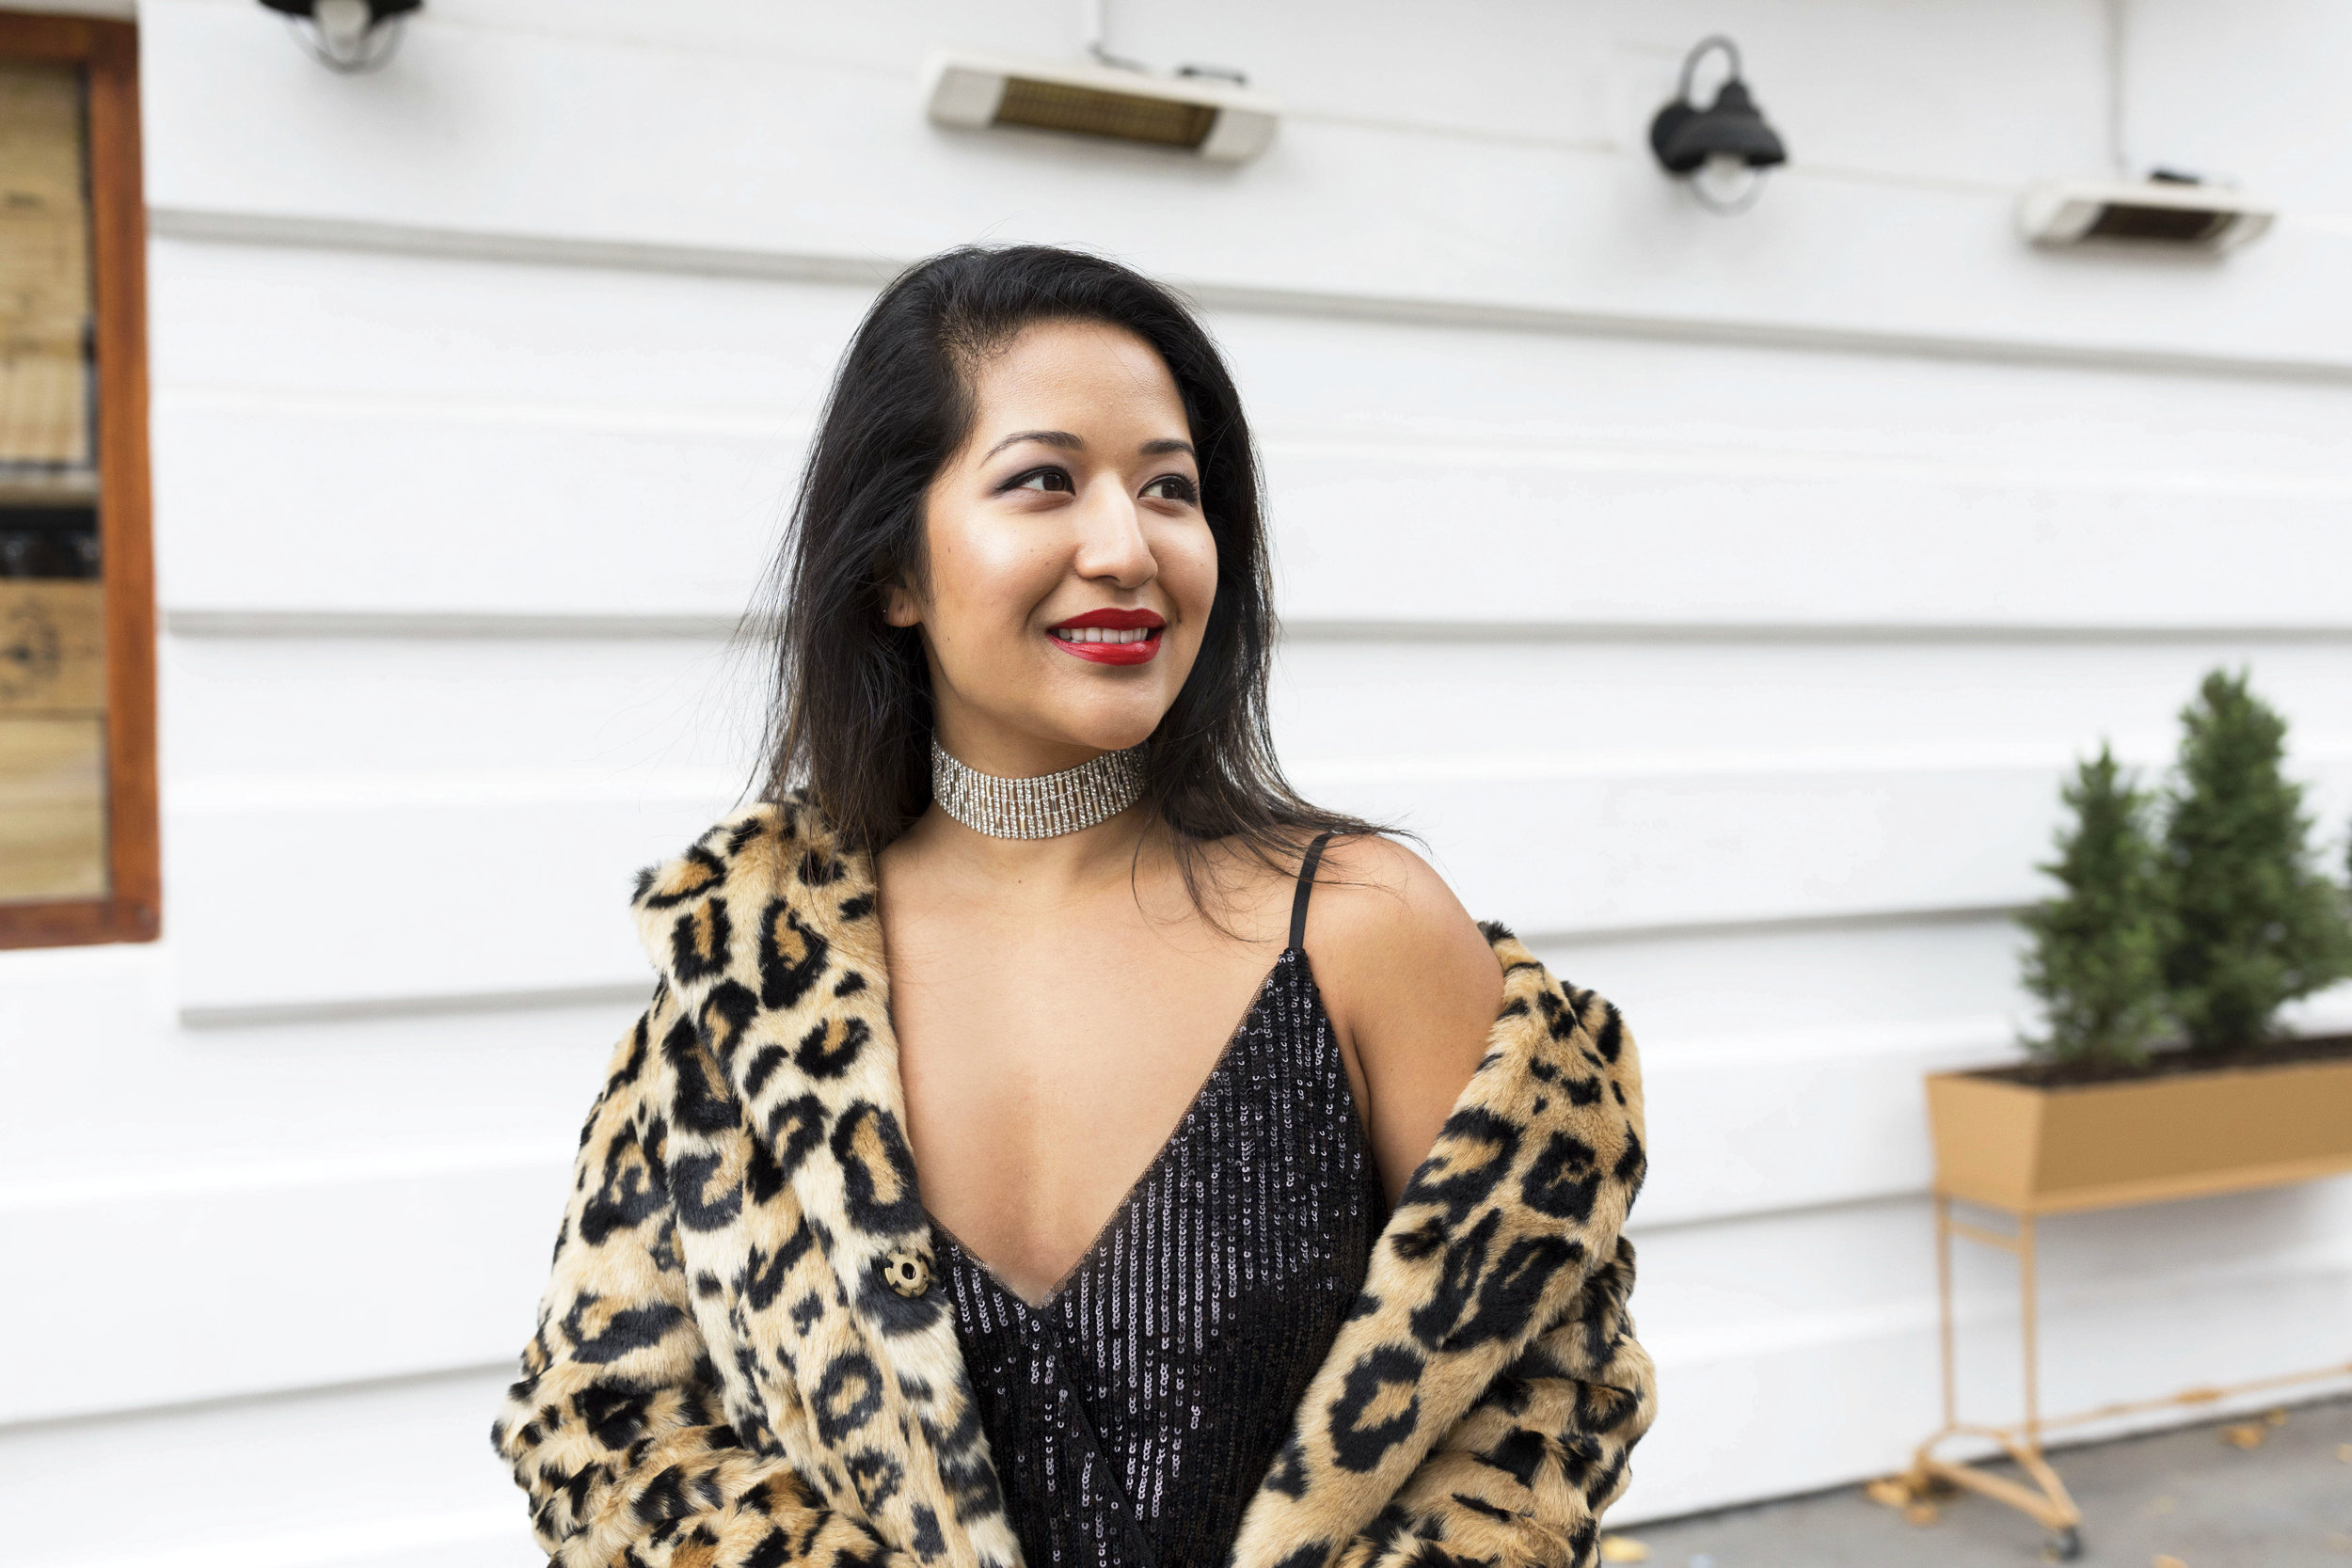 Krity S x New Years Eve Outfit x Sequin Jumpsuit and Cheetah Faux Fur4.jpg